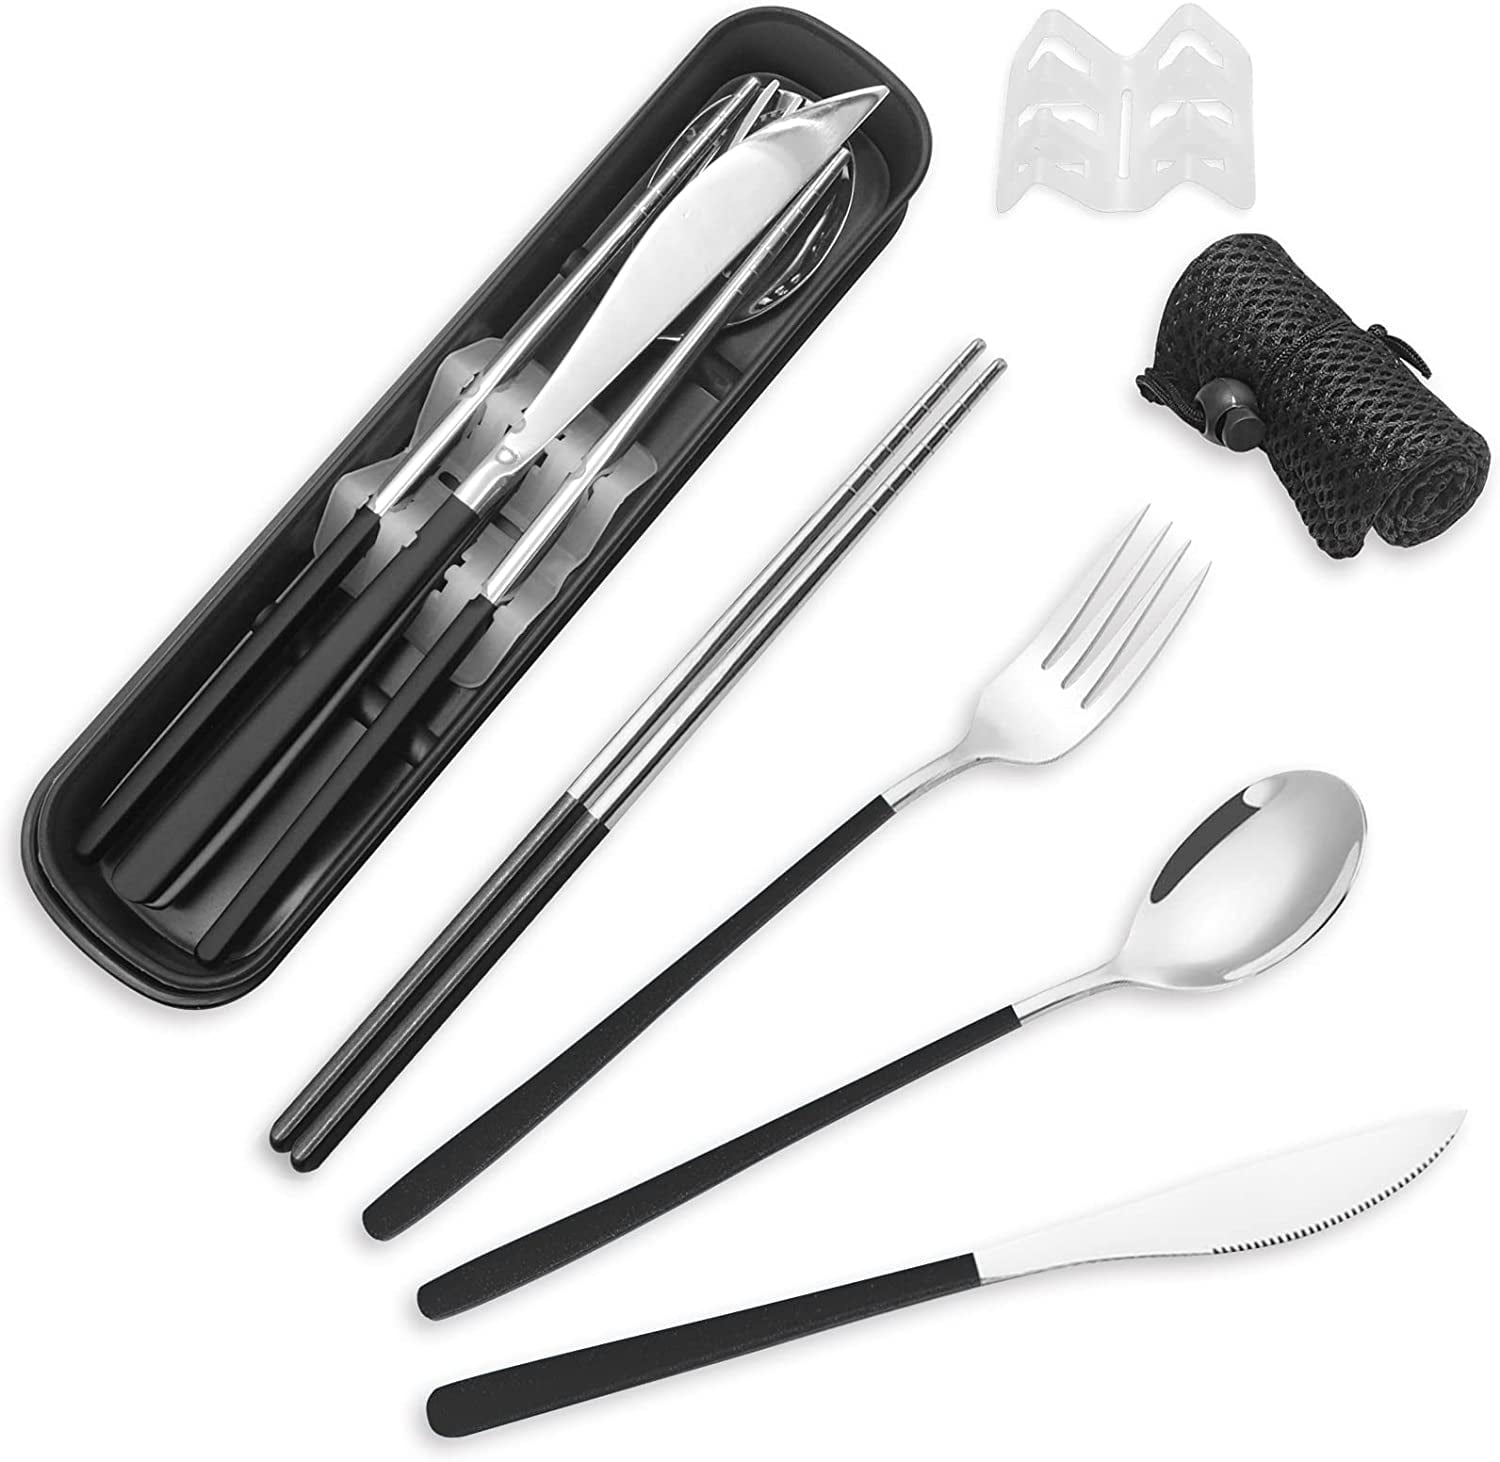 Stainless Steel Cutlery Set with Case, STONCEL Portable Travel Lunch  Utensils, Reusable Fork Spoon Knife Chopsticks Set for Office School Travel